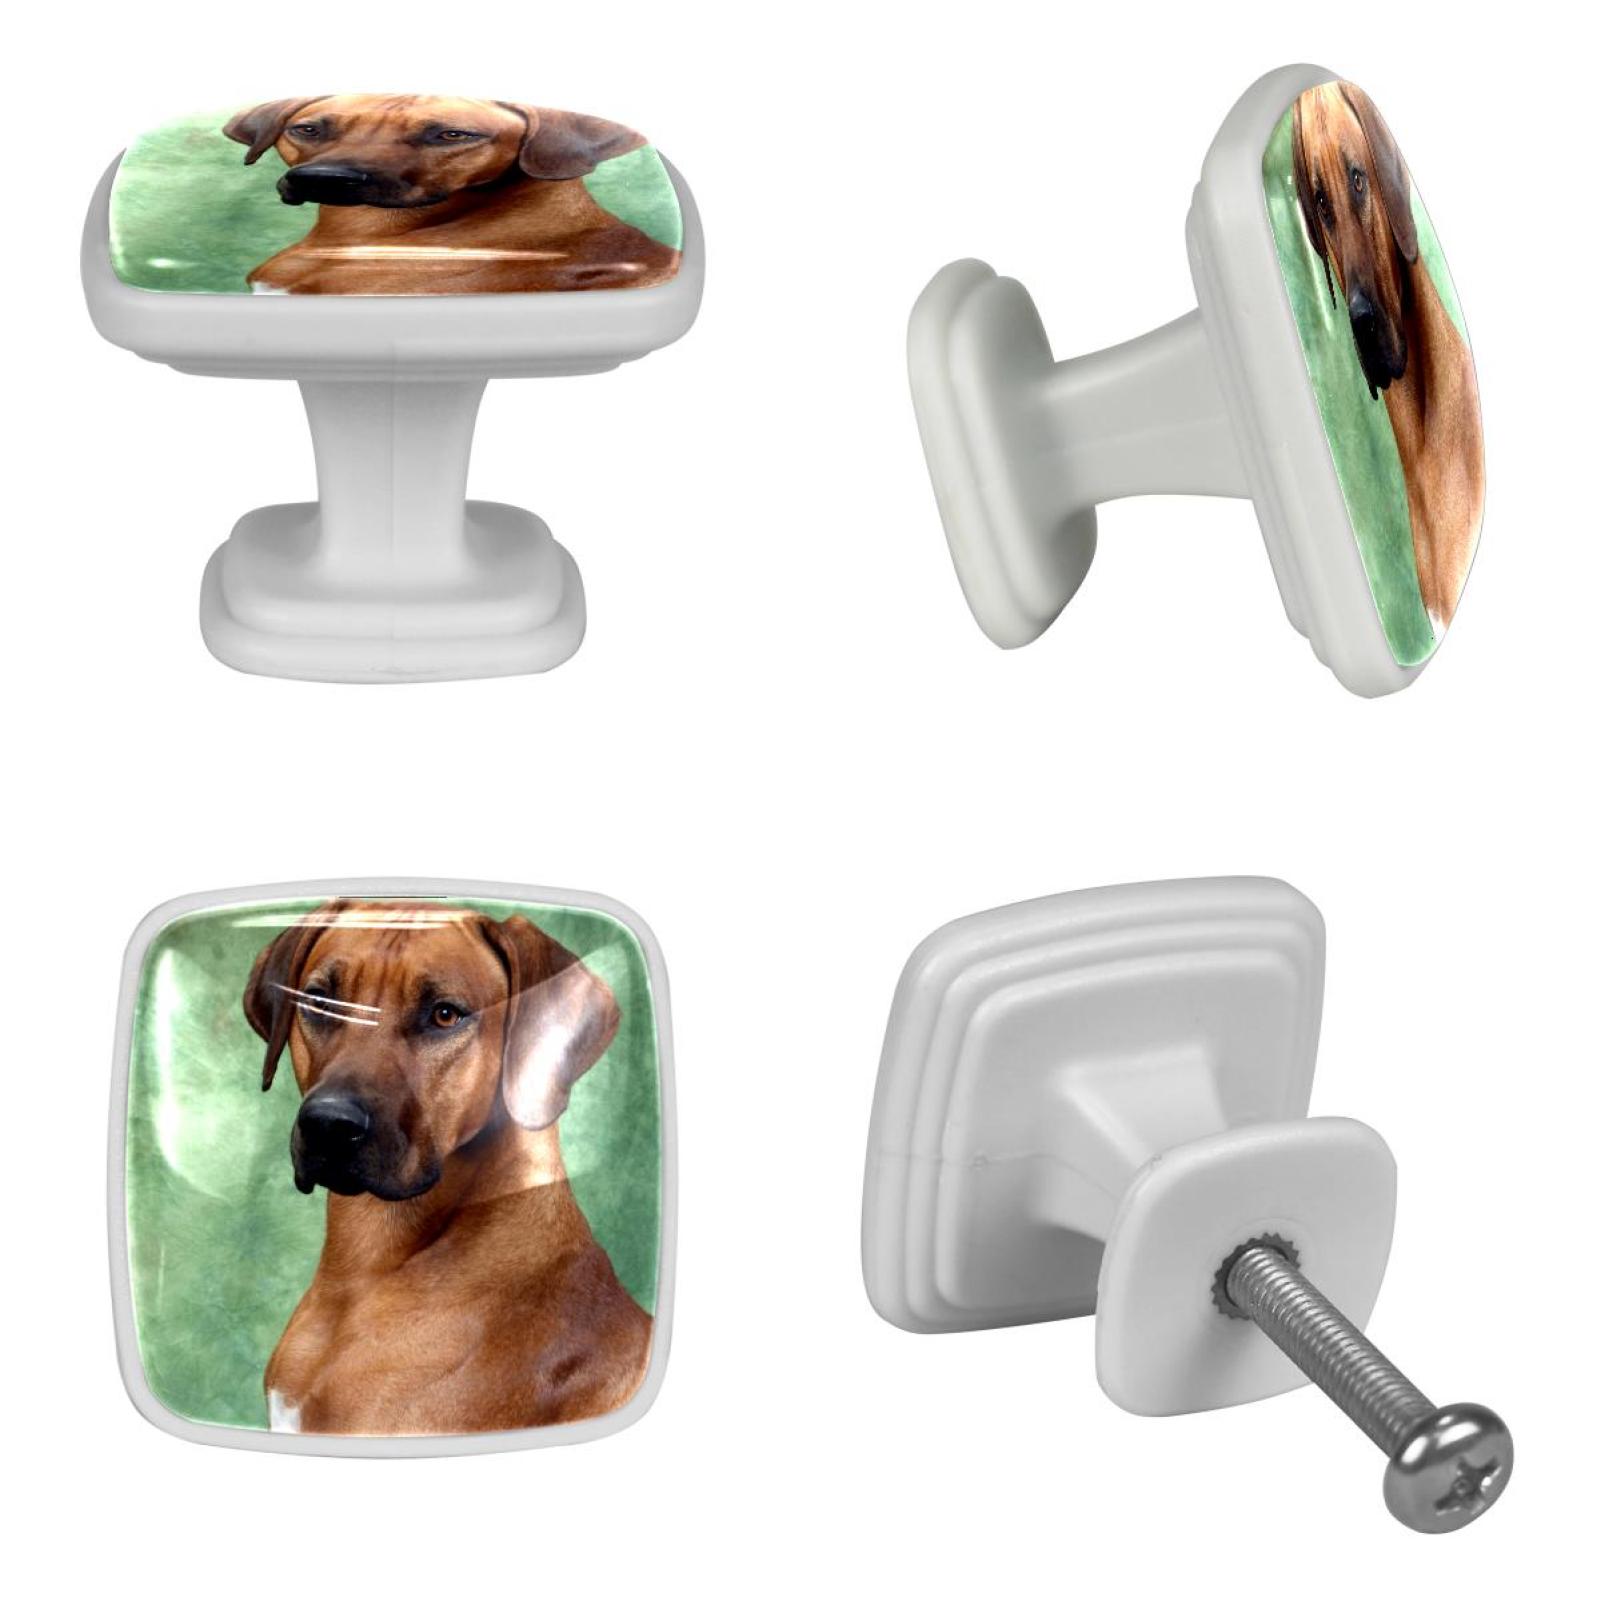 Ownta 4 Pcs Square Cabinet Handle Cupboard Fluorescence Knob Glowing in the Dark Drawer Pulls Handle Drawer Knobs with Screws Furniture Decor Rhodesian Ridgeback Dog - image 4 of 5